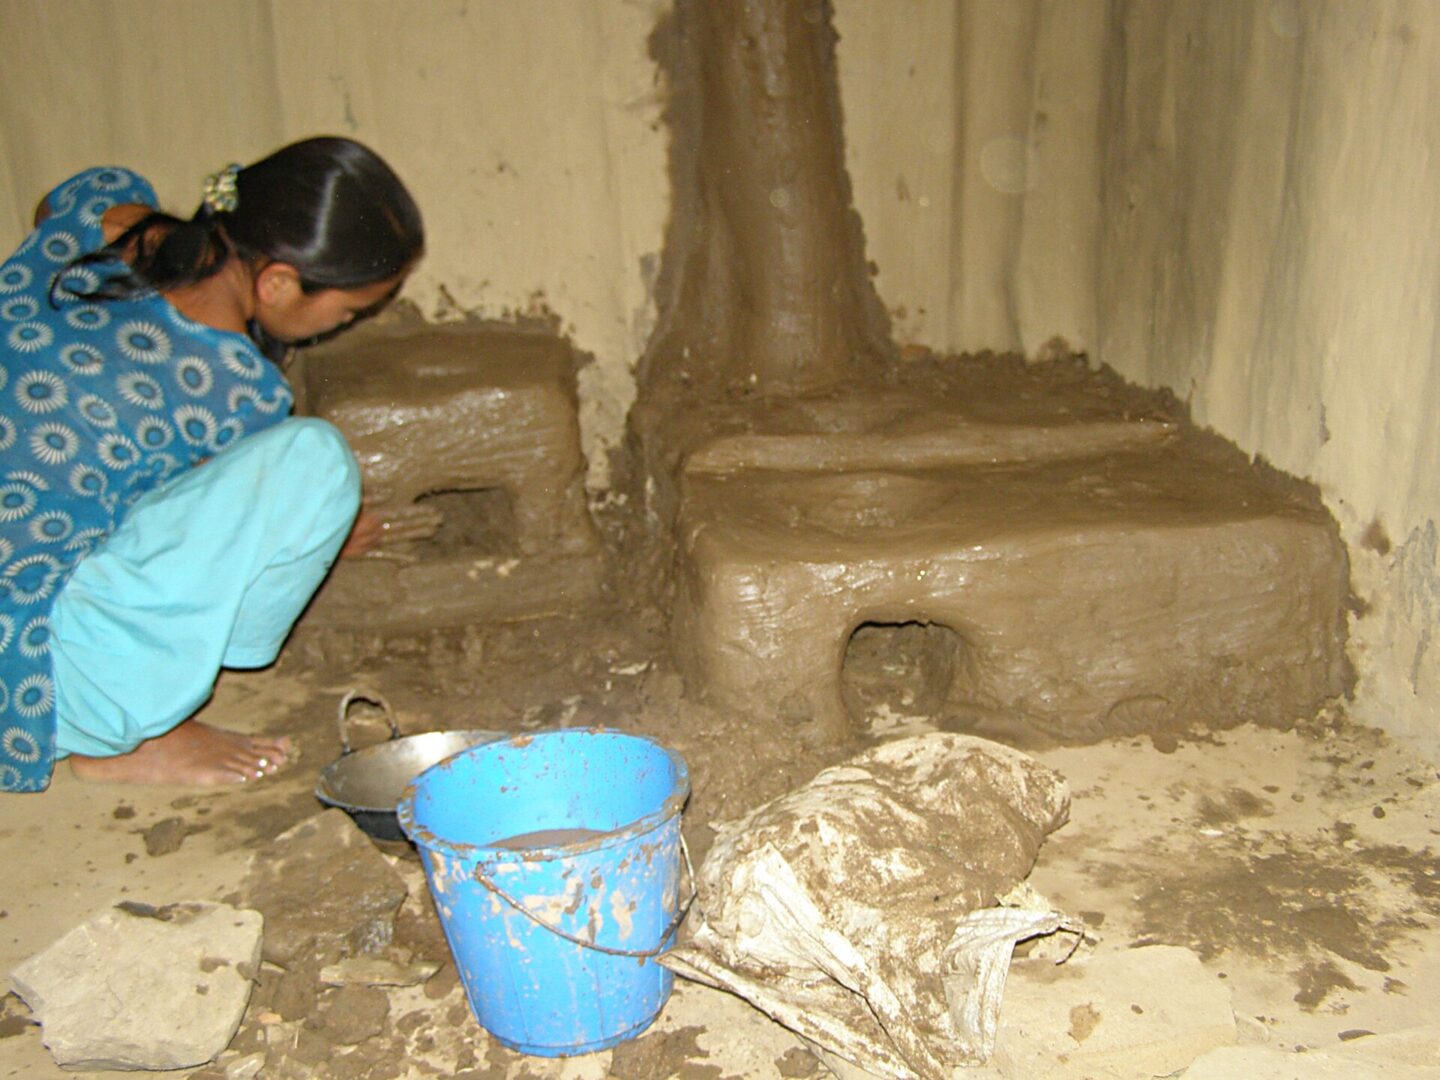 A girl is kneeling down in mud with a bucket.